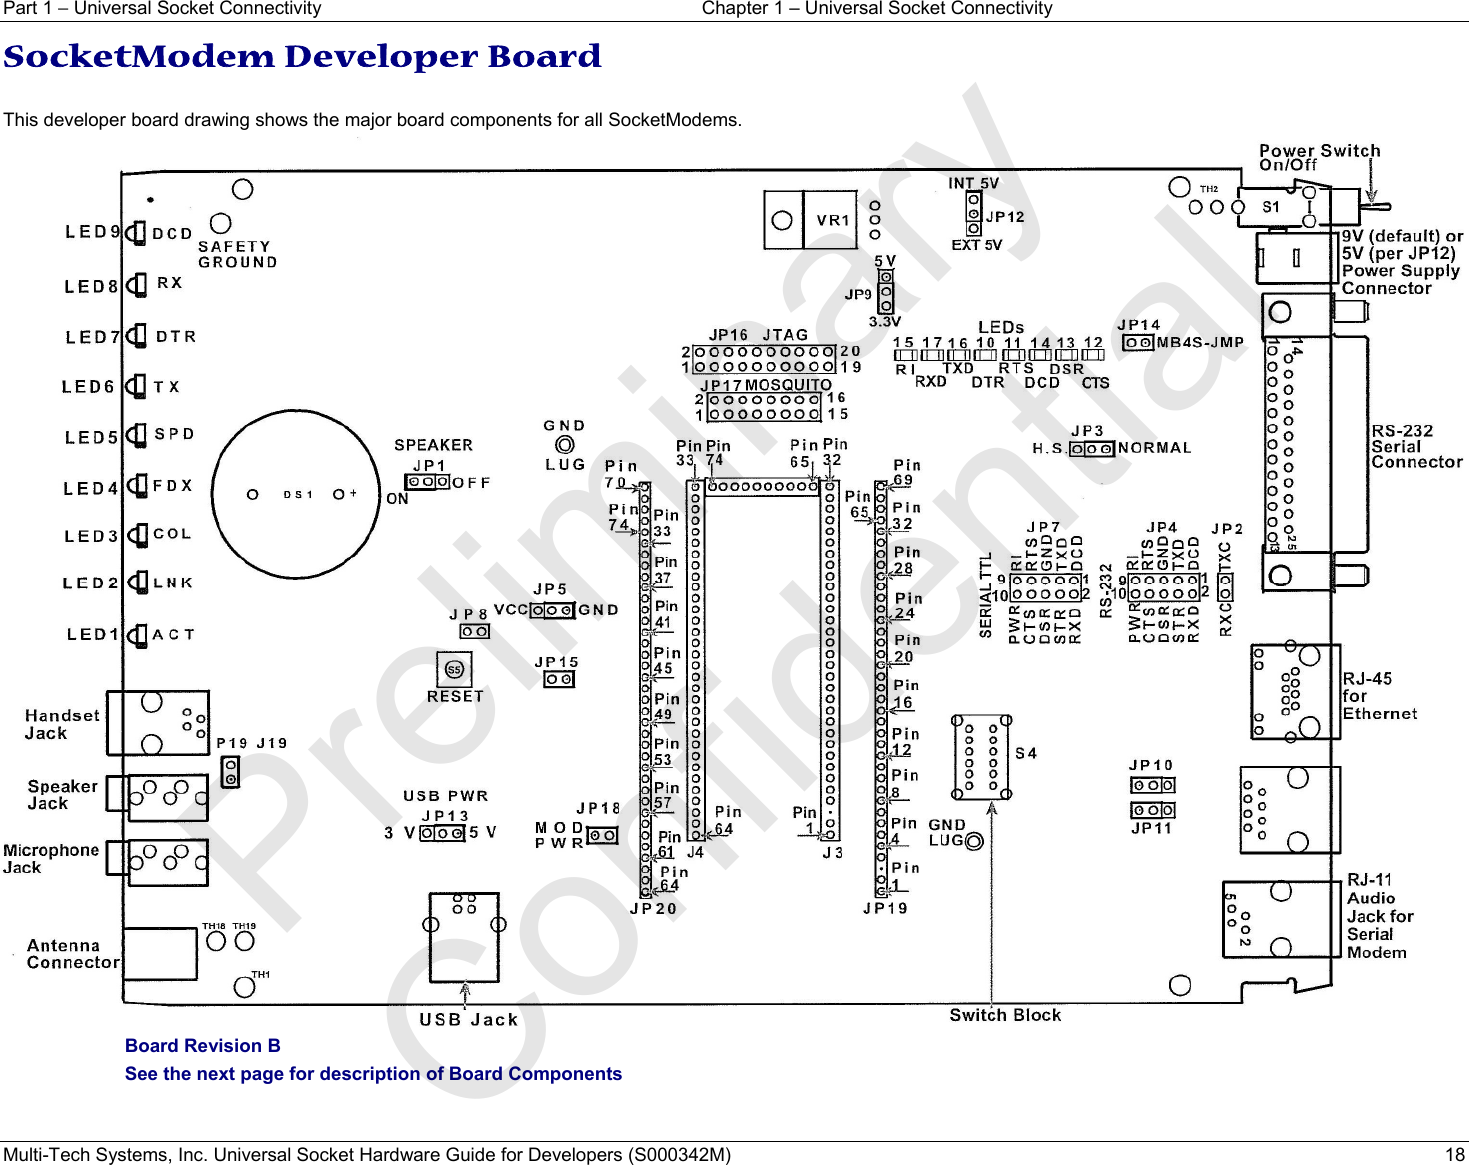 Part 1 − Universal Socket Connectivity  Chapter 1 – Universal Socket Connectivity Multi-Tech Systems, Inc. Universal Socket Hardware Guide for Developers (S000342M)  18 SocketModem Developer Board   This developer board drawing shows the major board components for all SocketModems.   Board Revision B See the next page for description of Board Components Preliminary  Confidential